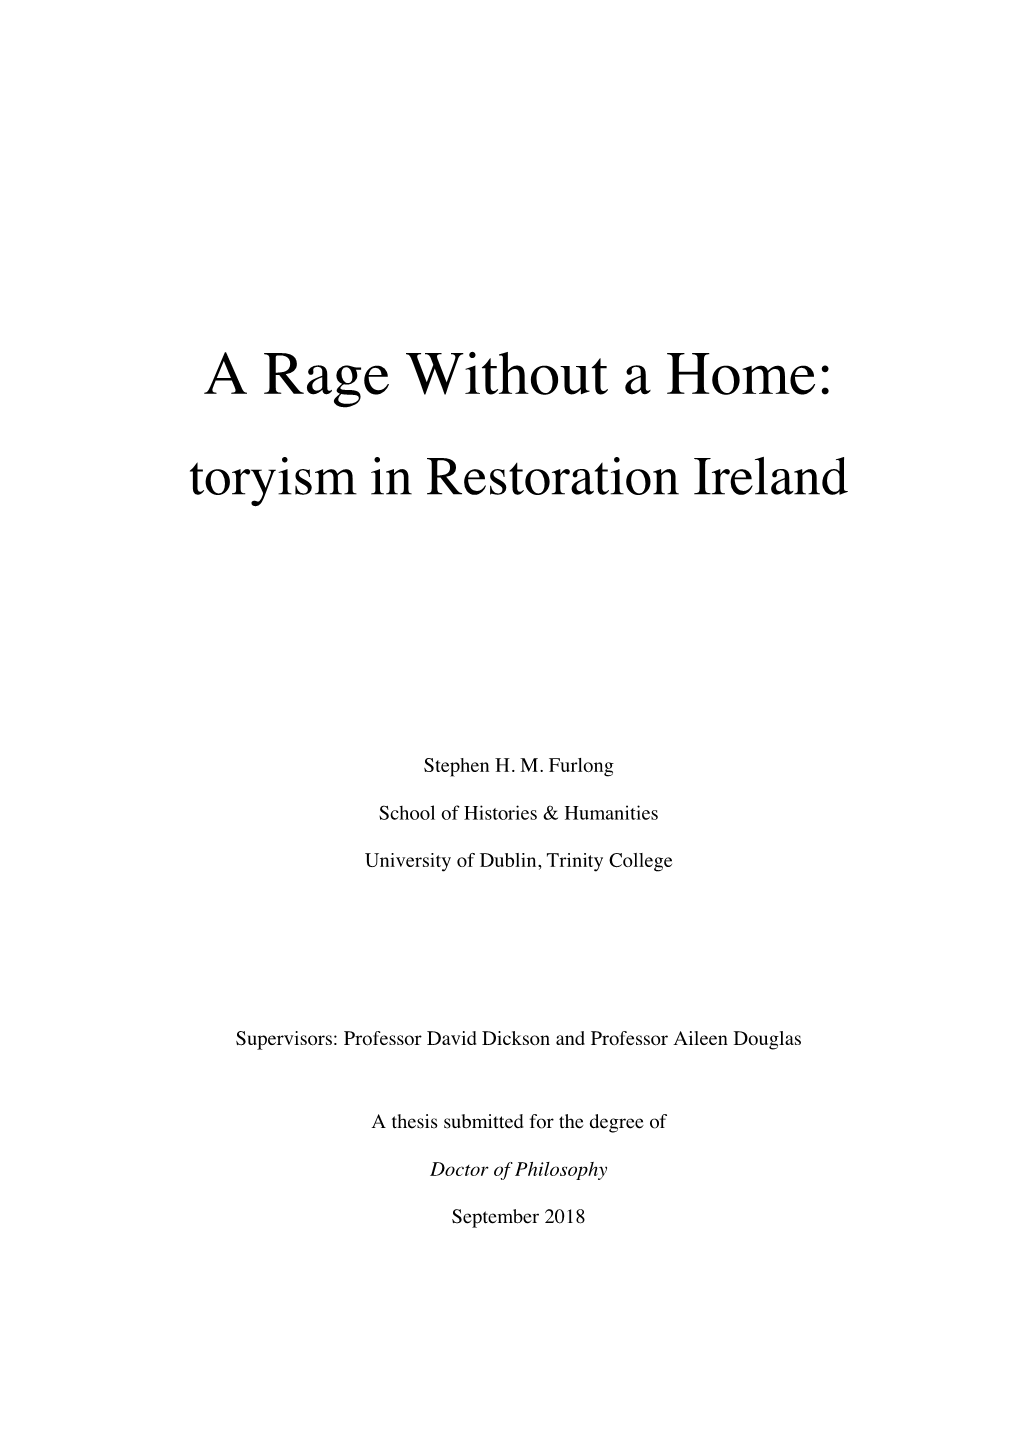 A Rage Without a Home: Toryism in Restoration Ireland